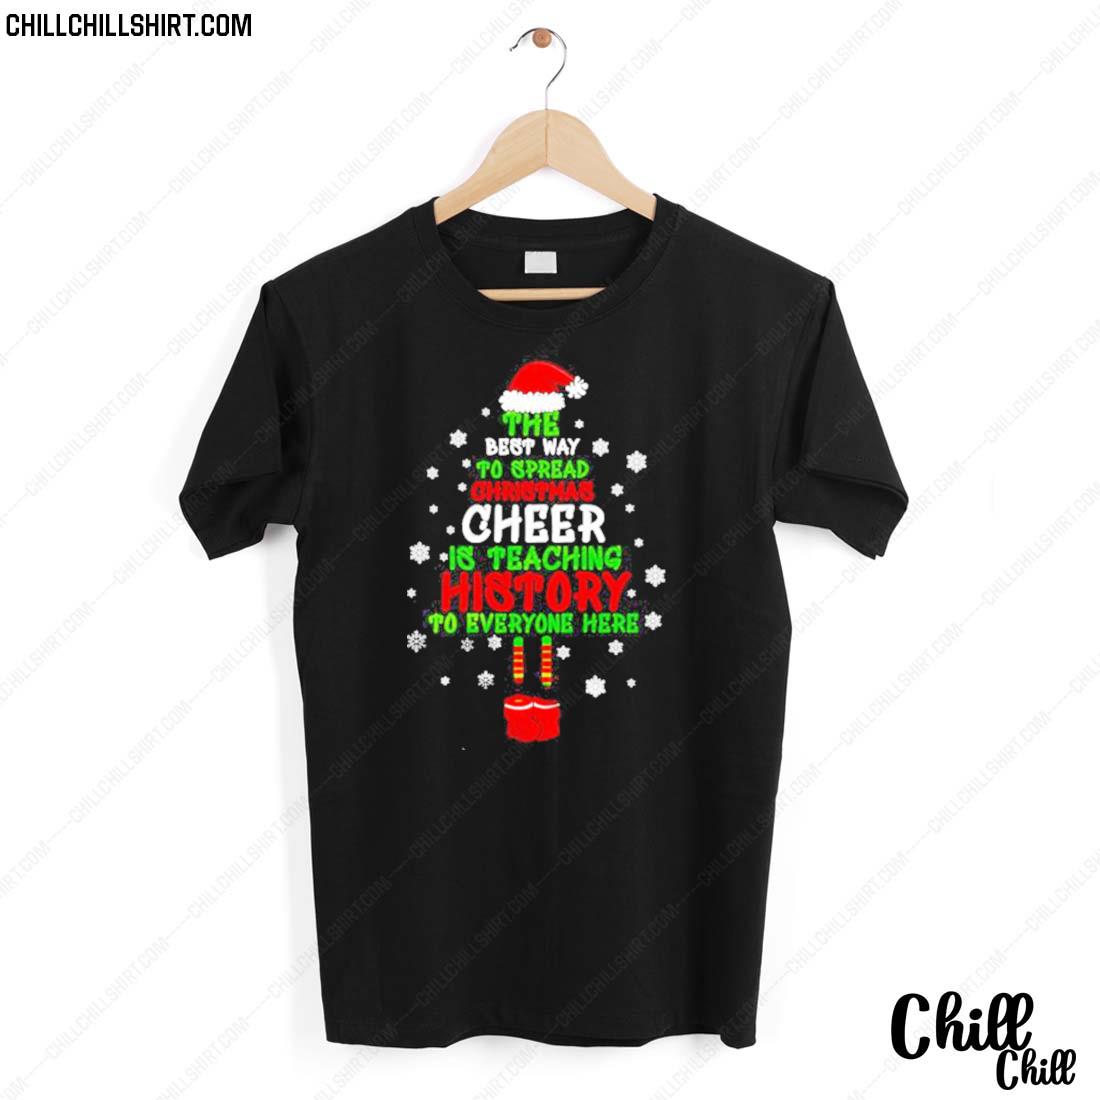 Nice the Best Way To Spread Christmas Cheer Is Teaching History To Everyone Here T-shirt